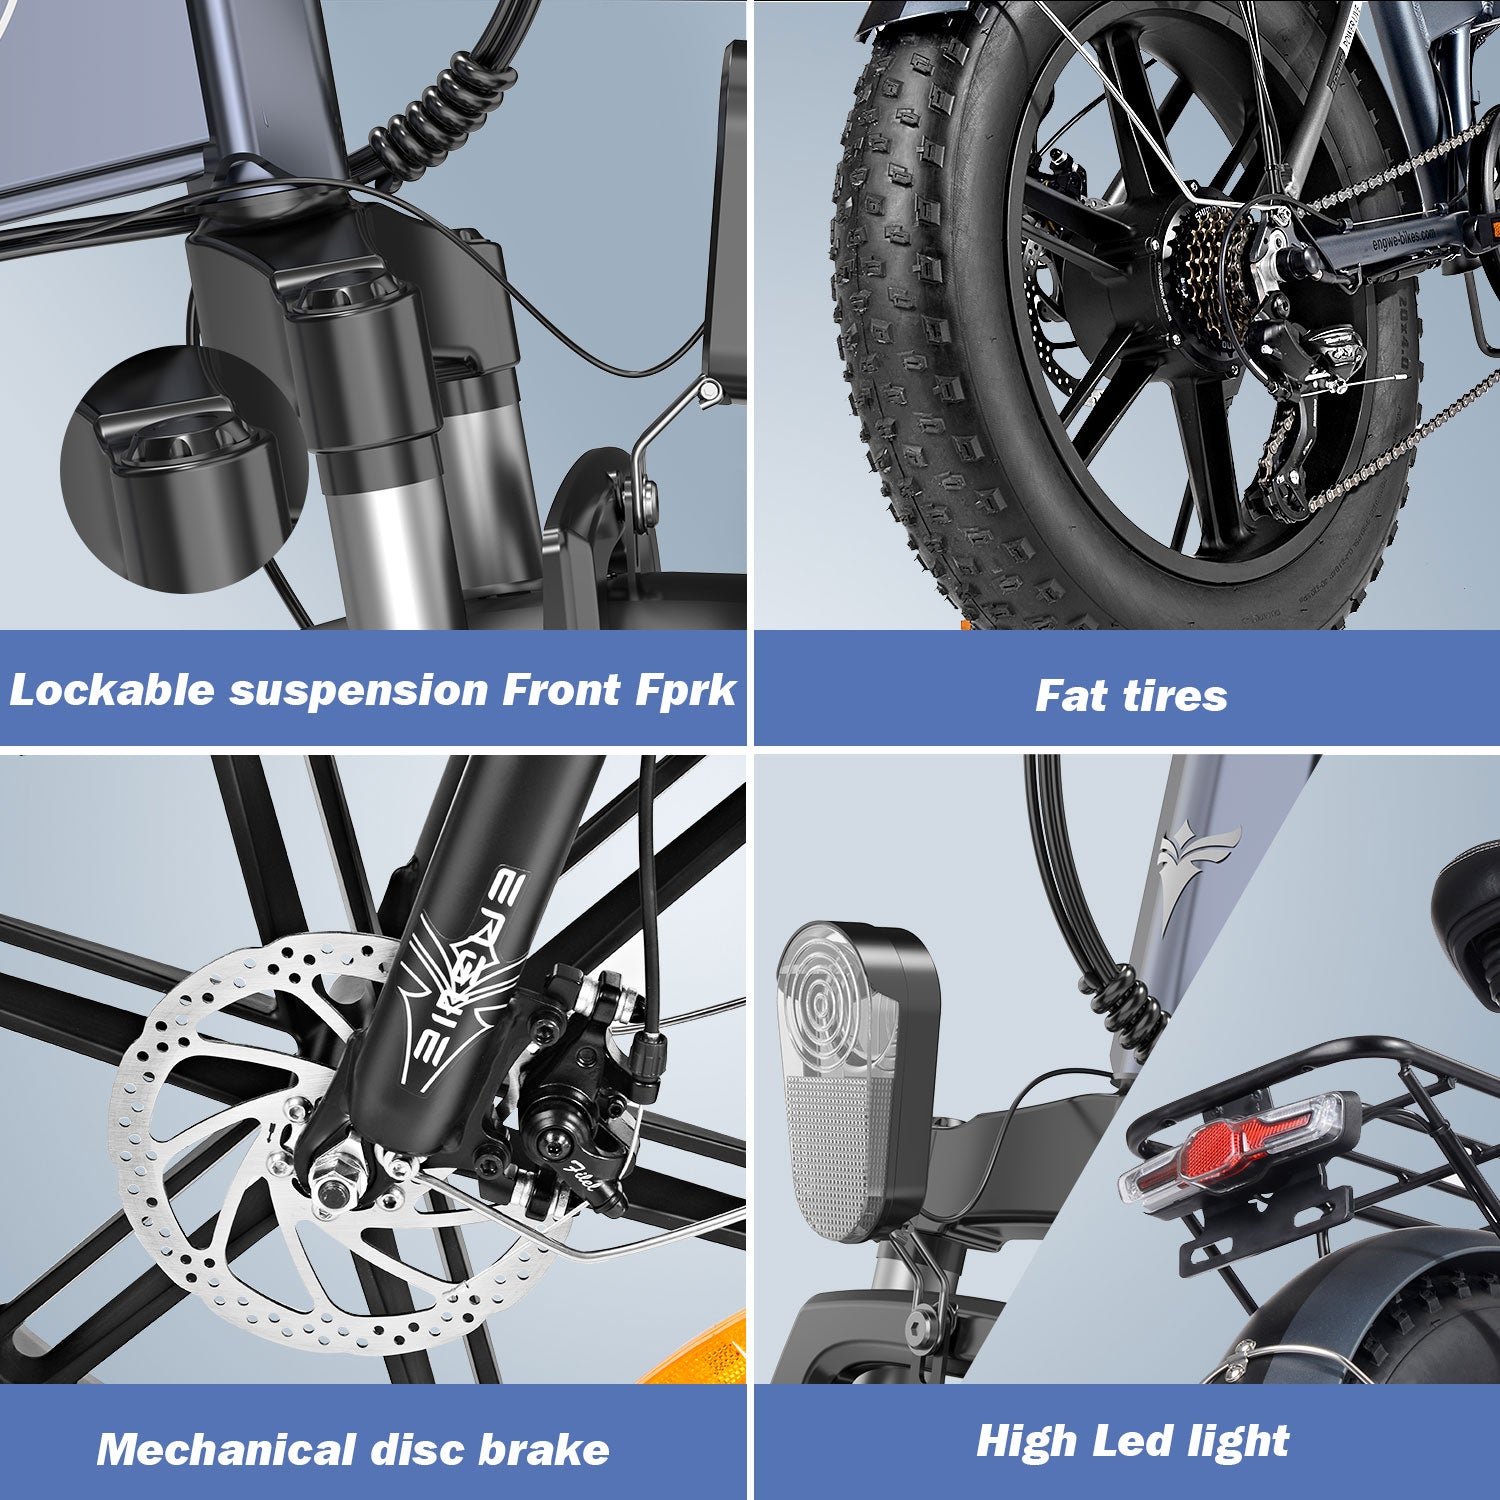 Close-up of Engwe EP-2 Pro's lockable suspension fork and fat tires, key features for rugged terrain biking.